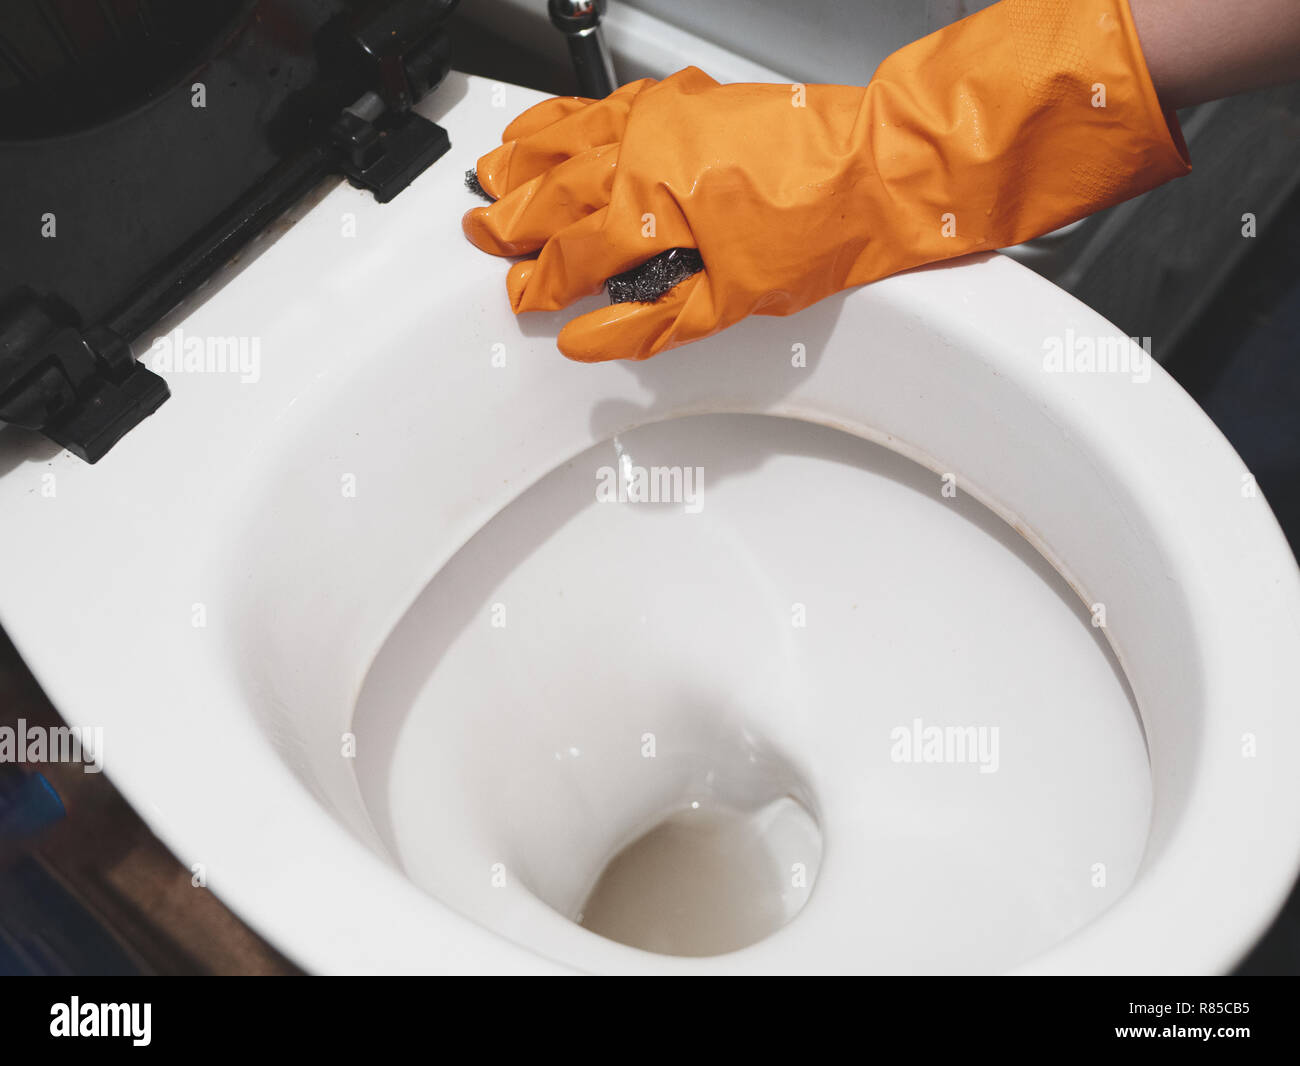 dirty work for illegal migrants - cleaning toilets. low paid job Stock Photo